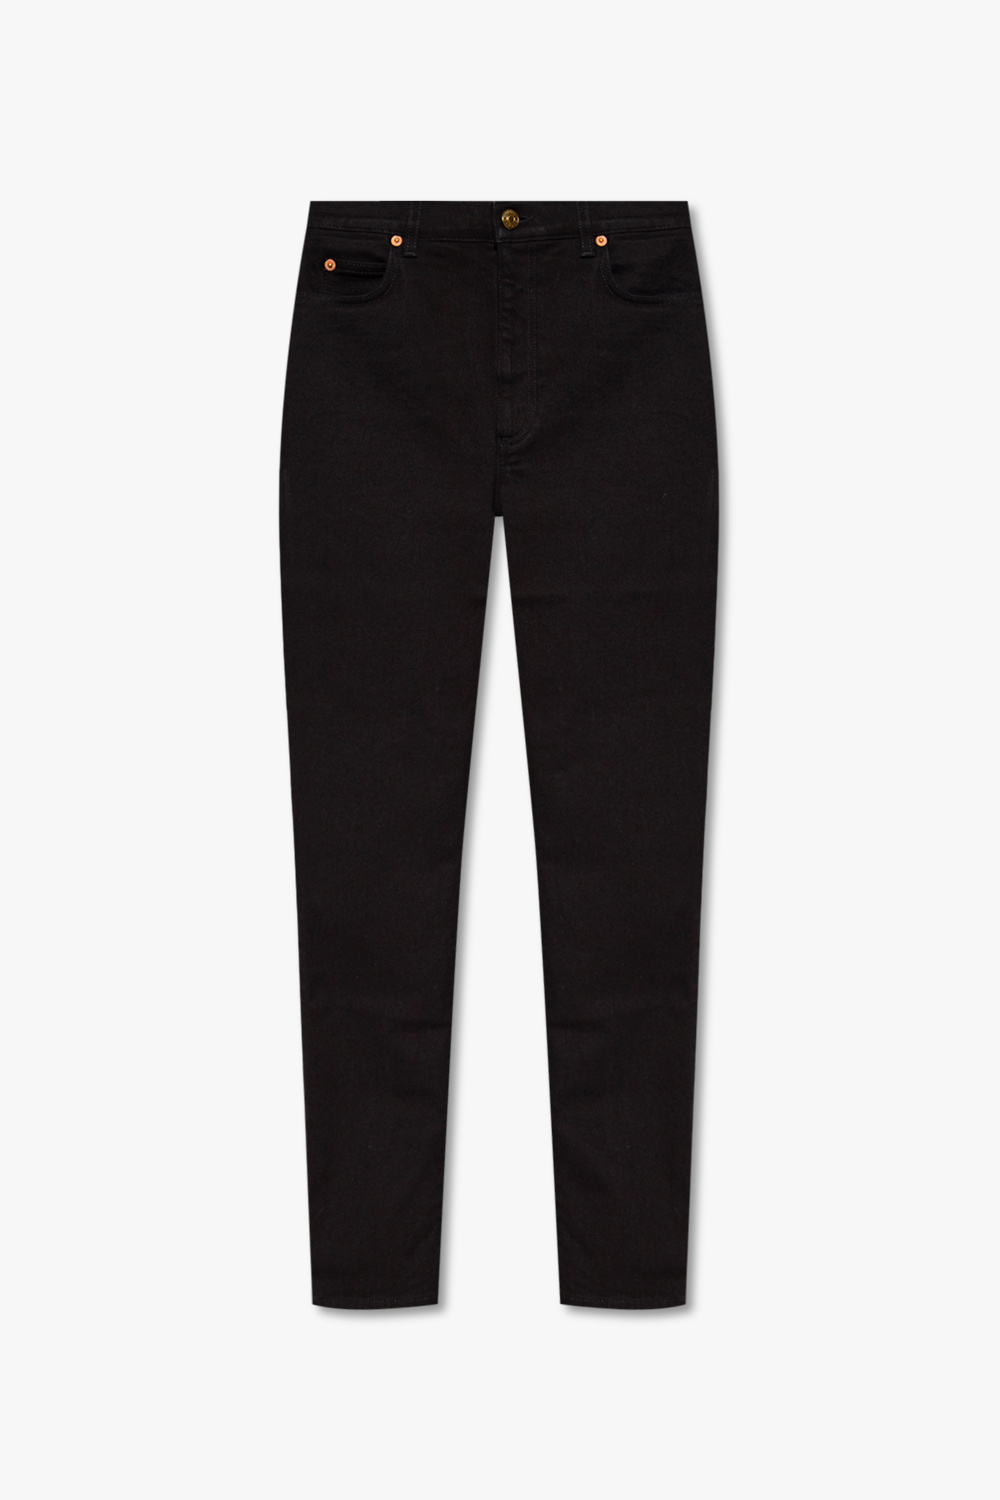 Gucci High-waisted jeans